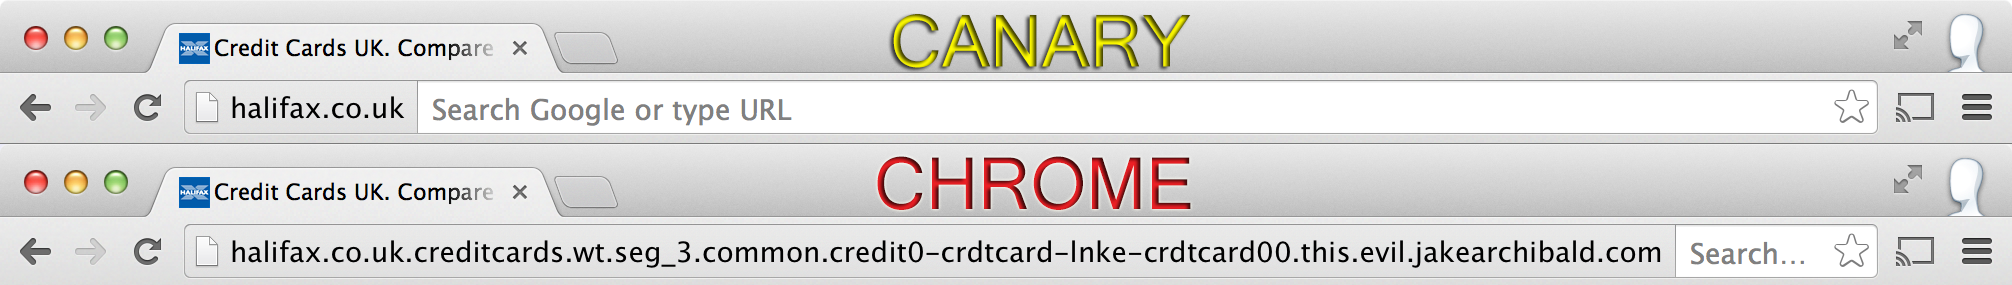 Nom : canary-vs-chrome.png
Affichages : 2248
Taille : 311,5 Ko